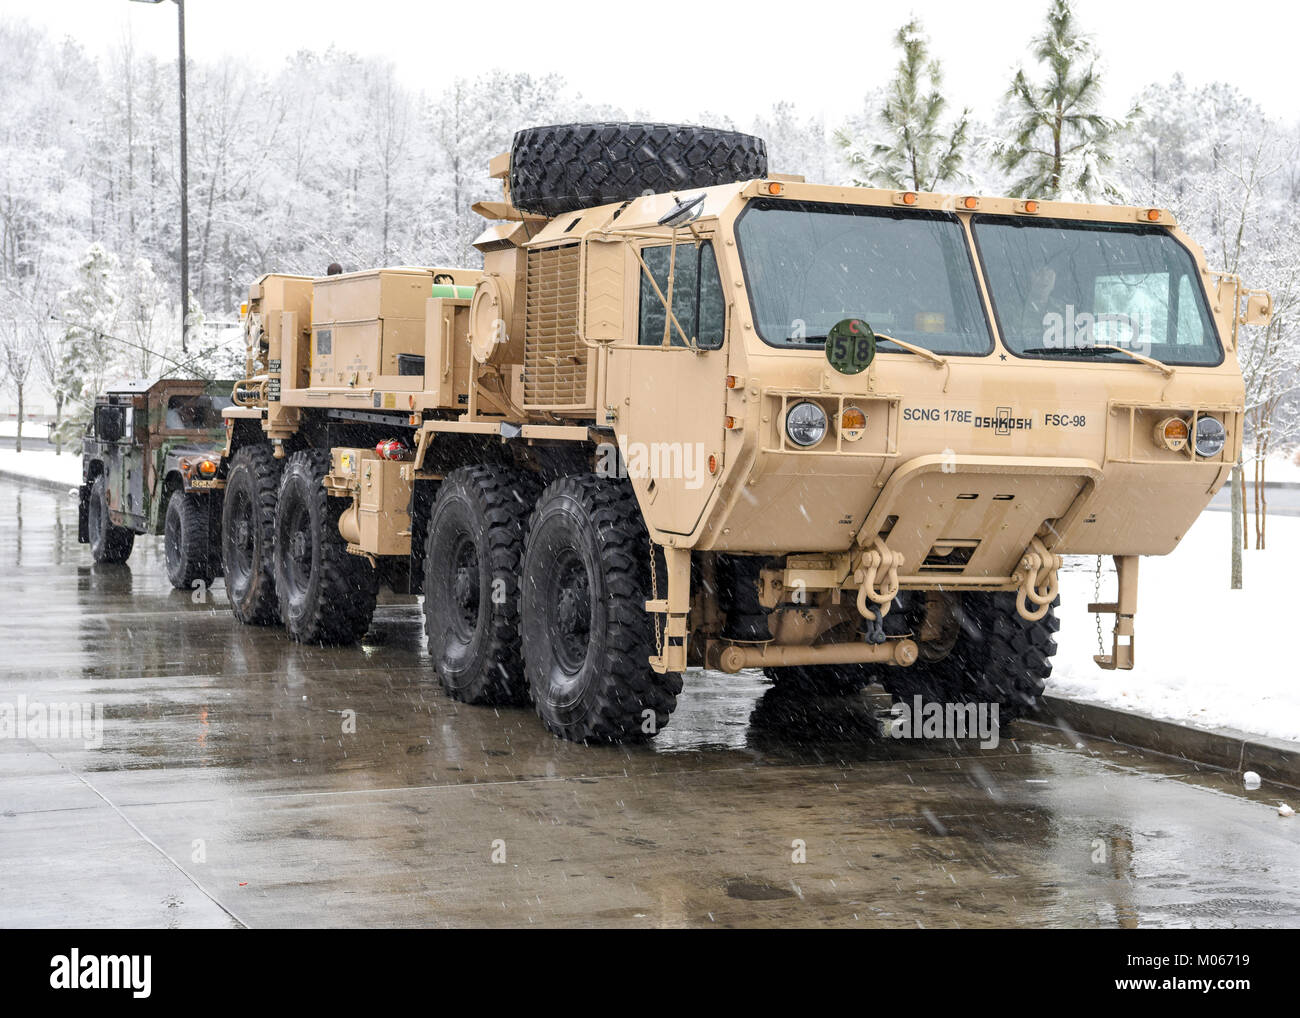 U.S. Soldiers with the Field Maintenance Shop 5 Vehicle Recovery Team, South Carolina National Guard, help assist Highway Patrol with vehicle recovery during a snow storm in Rock Hill, South Carolina, Jan. 17, 2018. Stock Photo